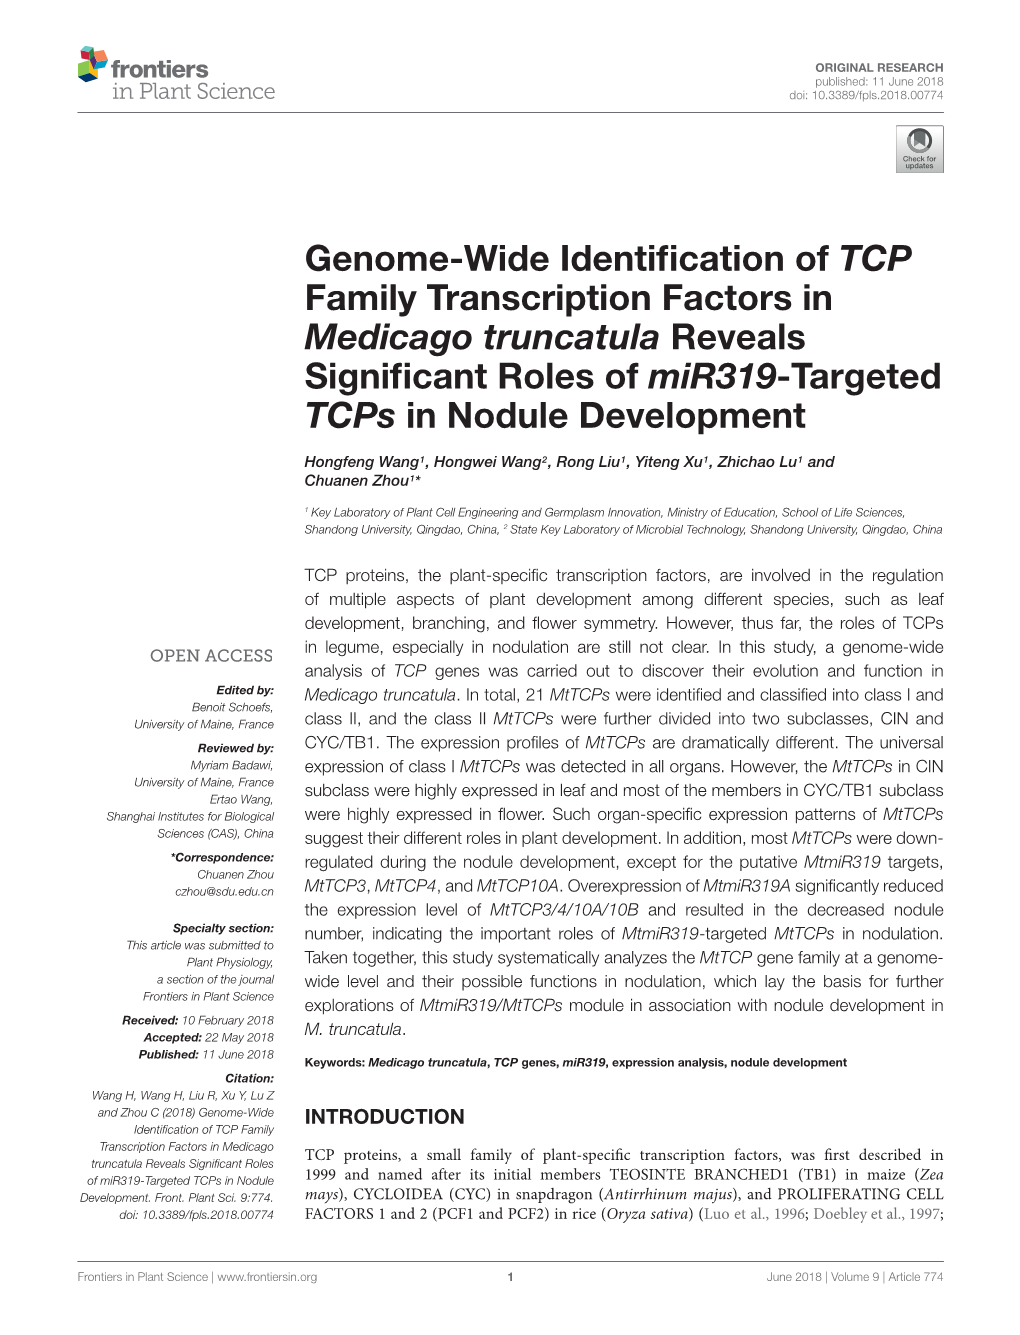 Genome-Wide Identification of TCP Family Transcription Factors In